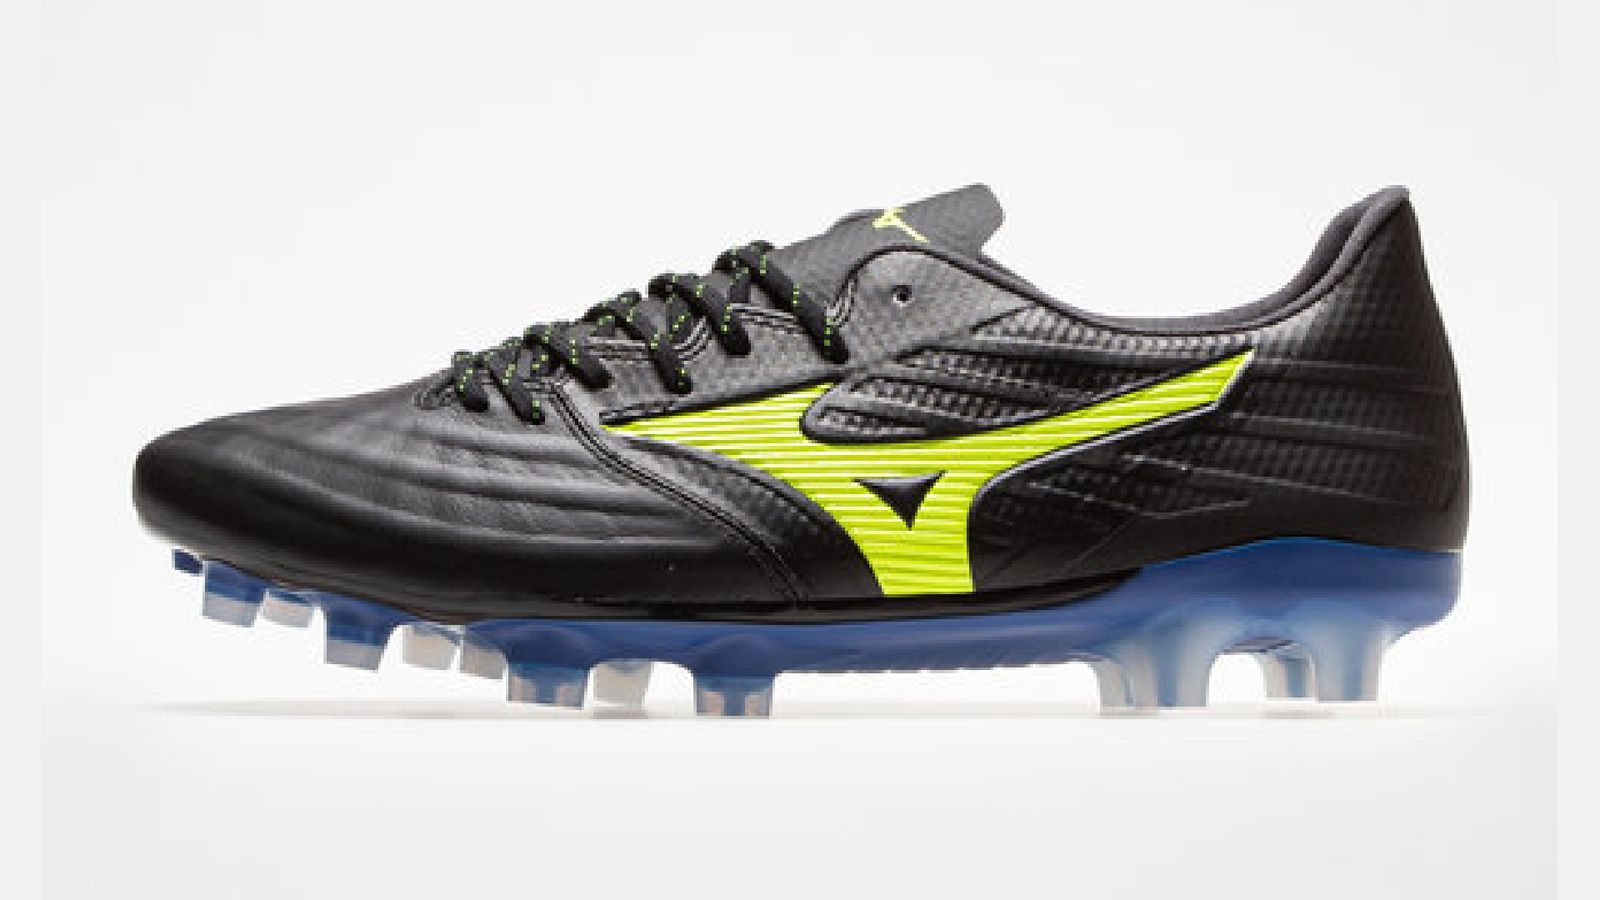 Mizuno Rebula III product image of a black boot with yellow Mizuno branding, featuring a translucent blue sole plate.